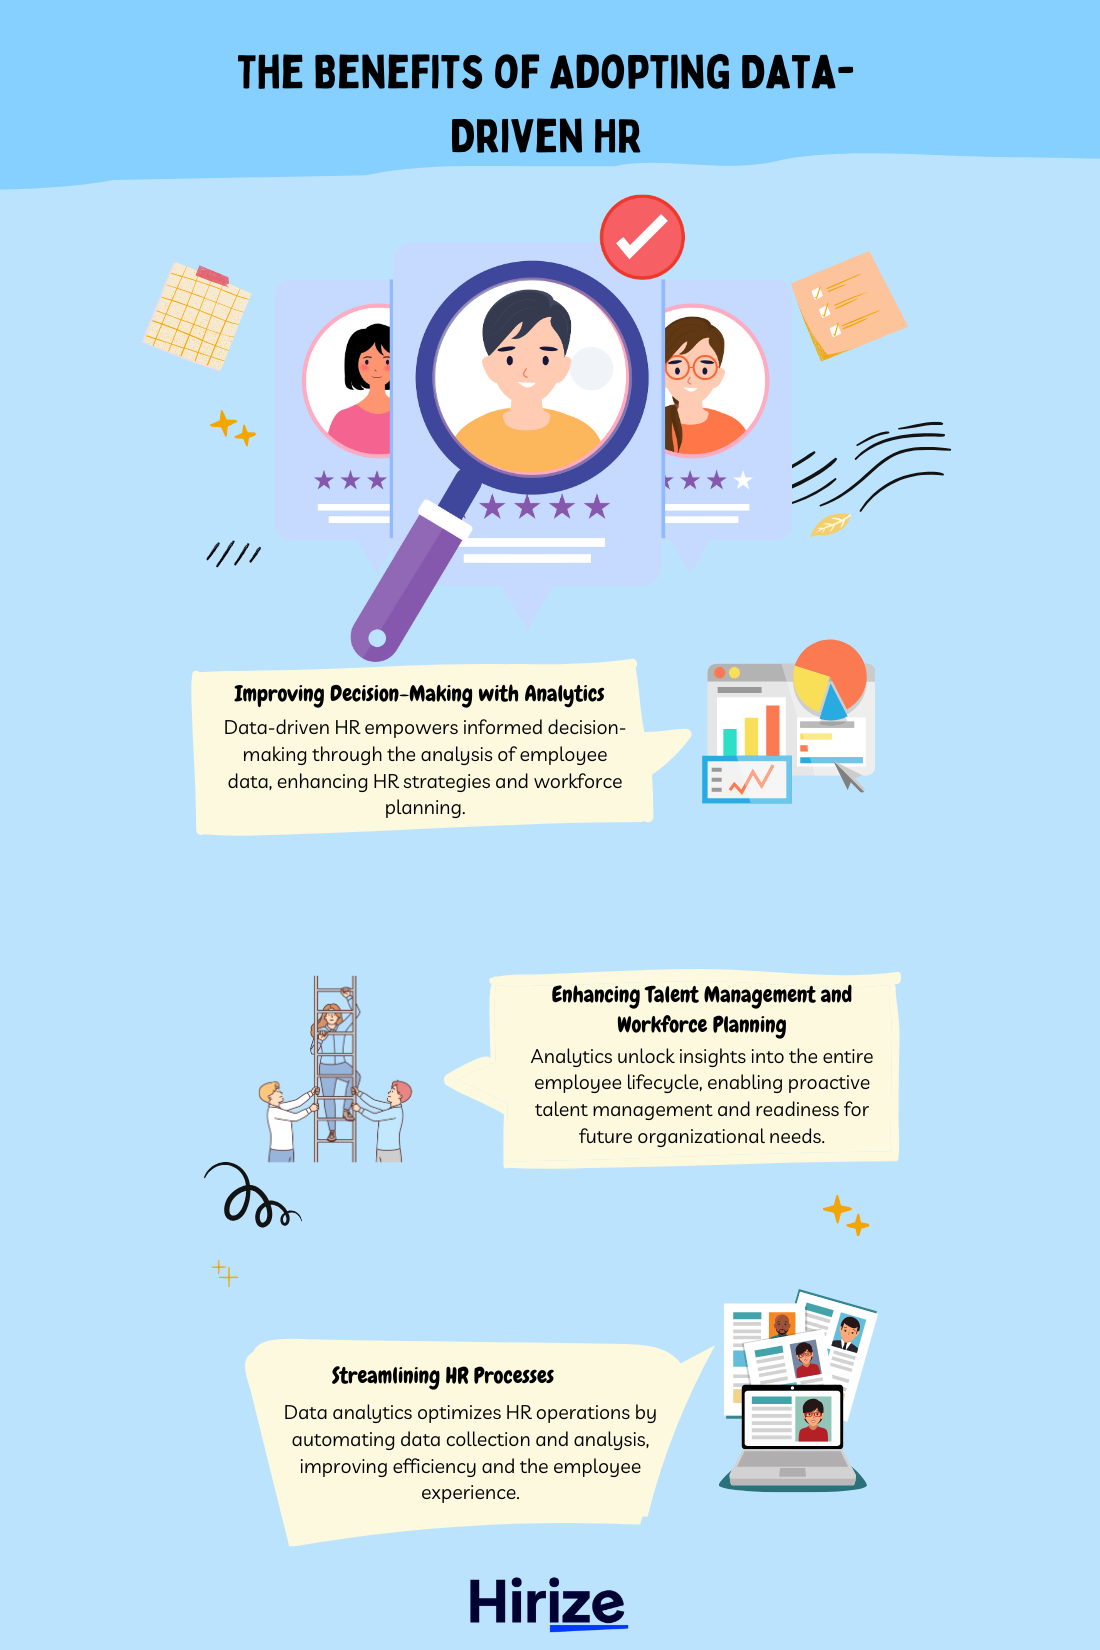 The Benefits of Adopting Data-Driven HR (400 x 600 piksel) (1).png